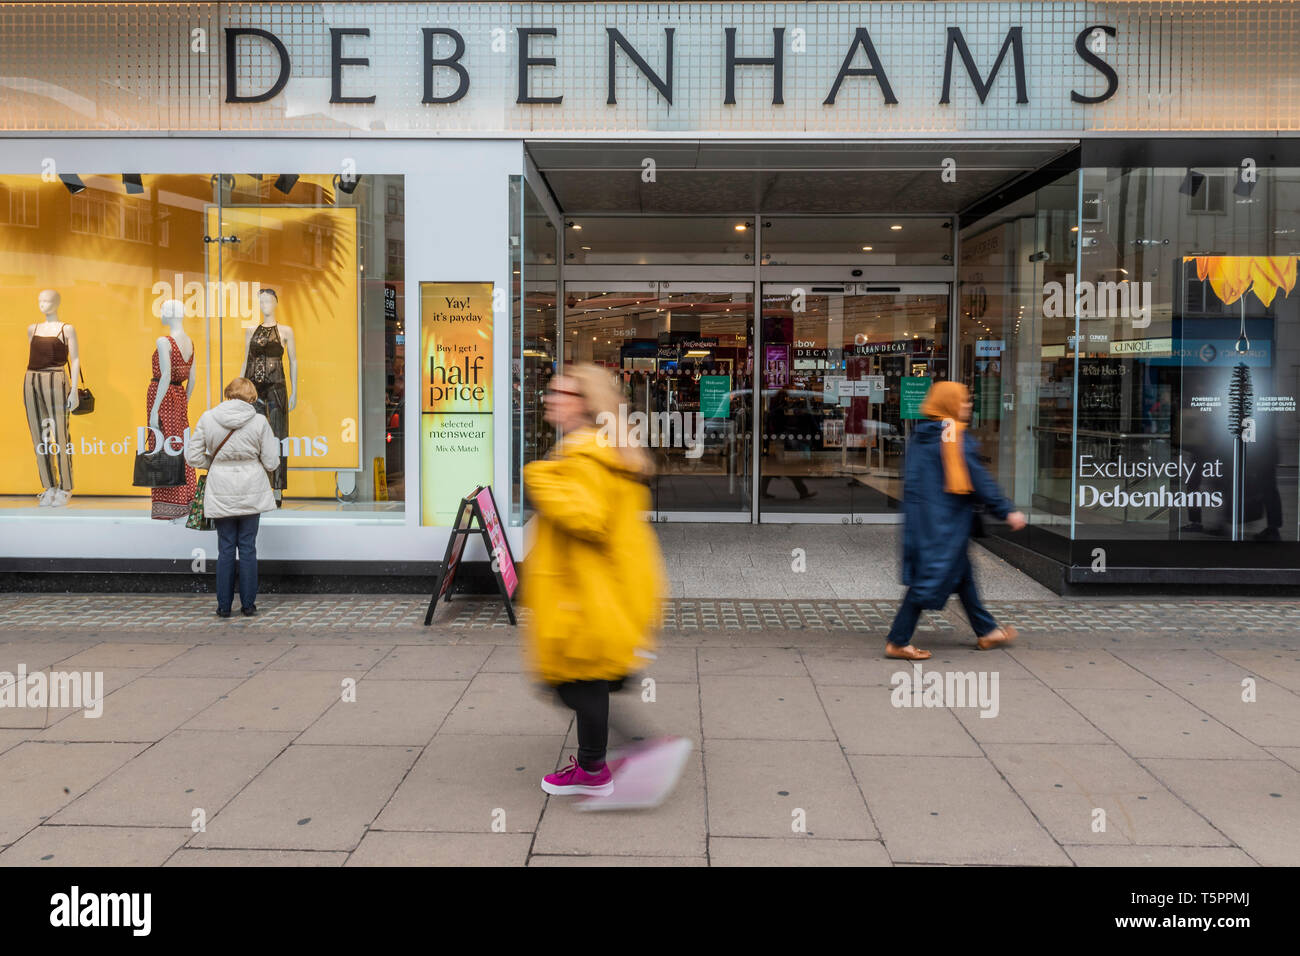 London, UK. 26th Apr 2019. Consumers pass by Debenhams Oxford Street. Debenhams names 22 store it will close by 2020. It seems its flagship store on Oxford Street is not one of them. Credit: Guy Bell/Alamy Live News Stock Photo